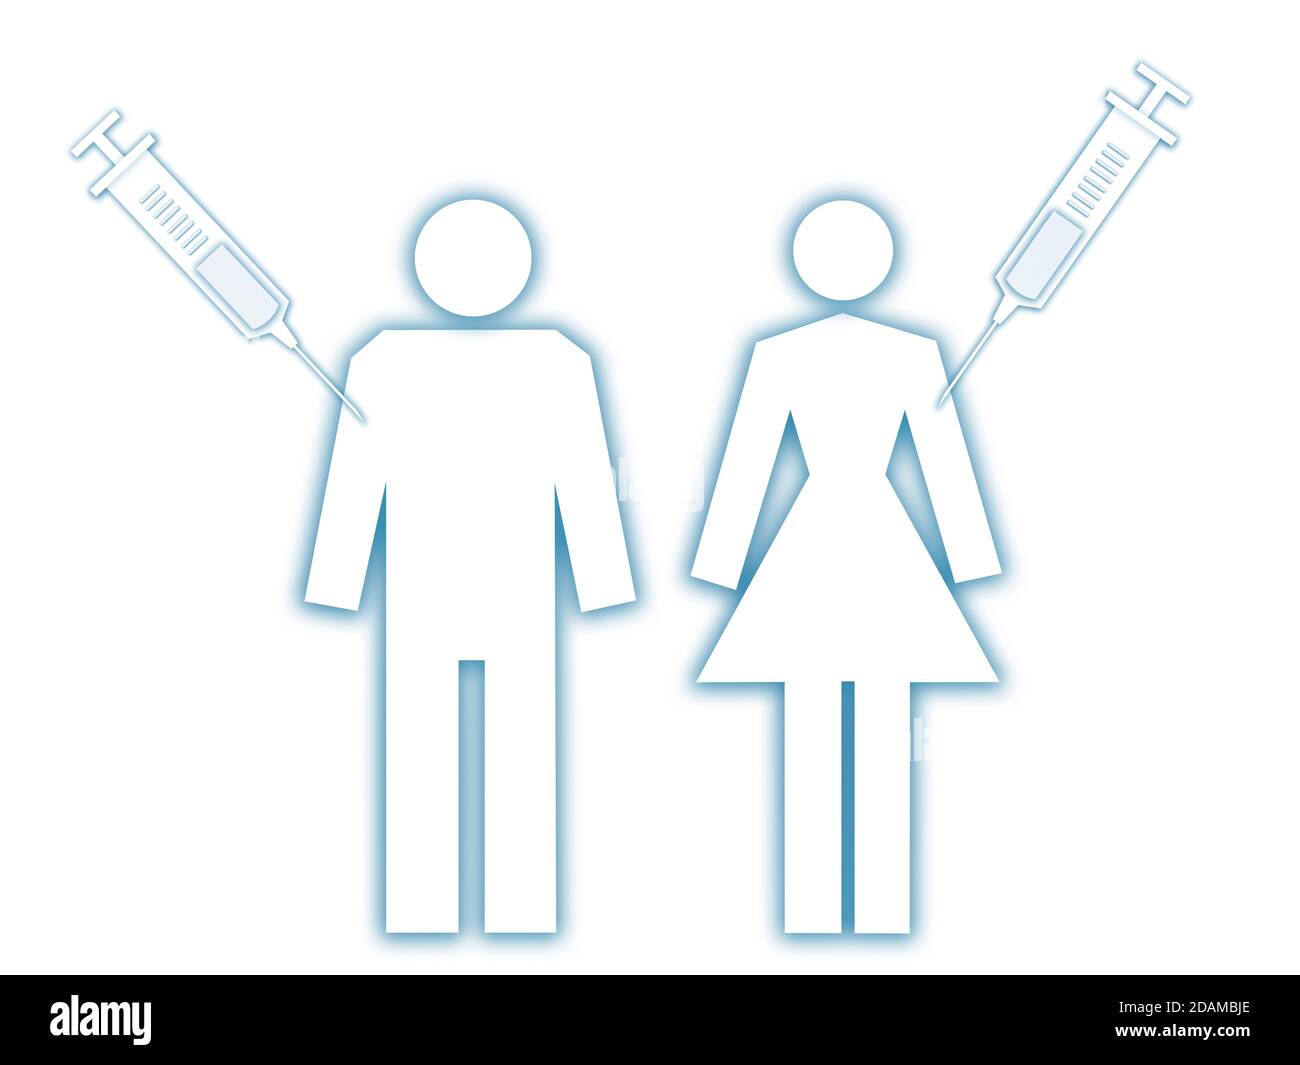 Man and woman being injected, illustration. Stock Photo